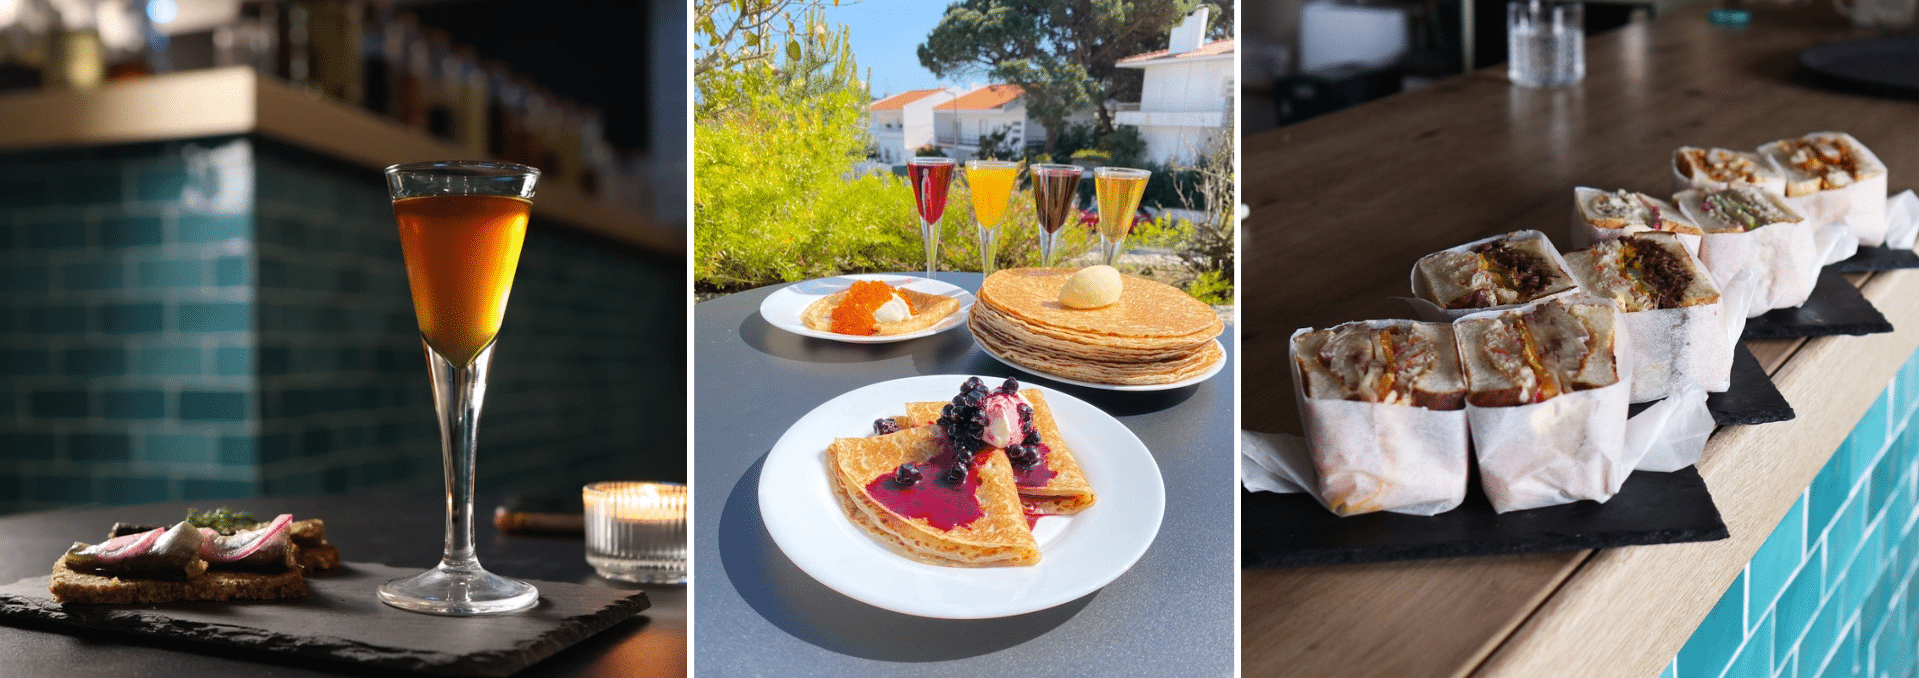 three images with the first showing a glass of nastoyka, the second showing pancakes with berries and the third showing several sandwiches ready to be served